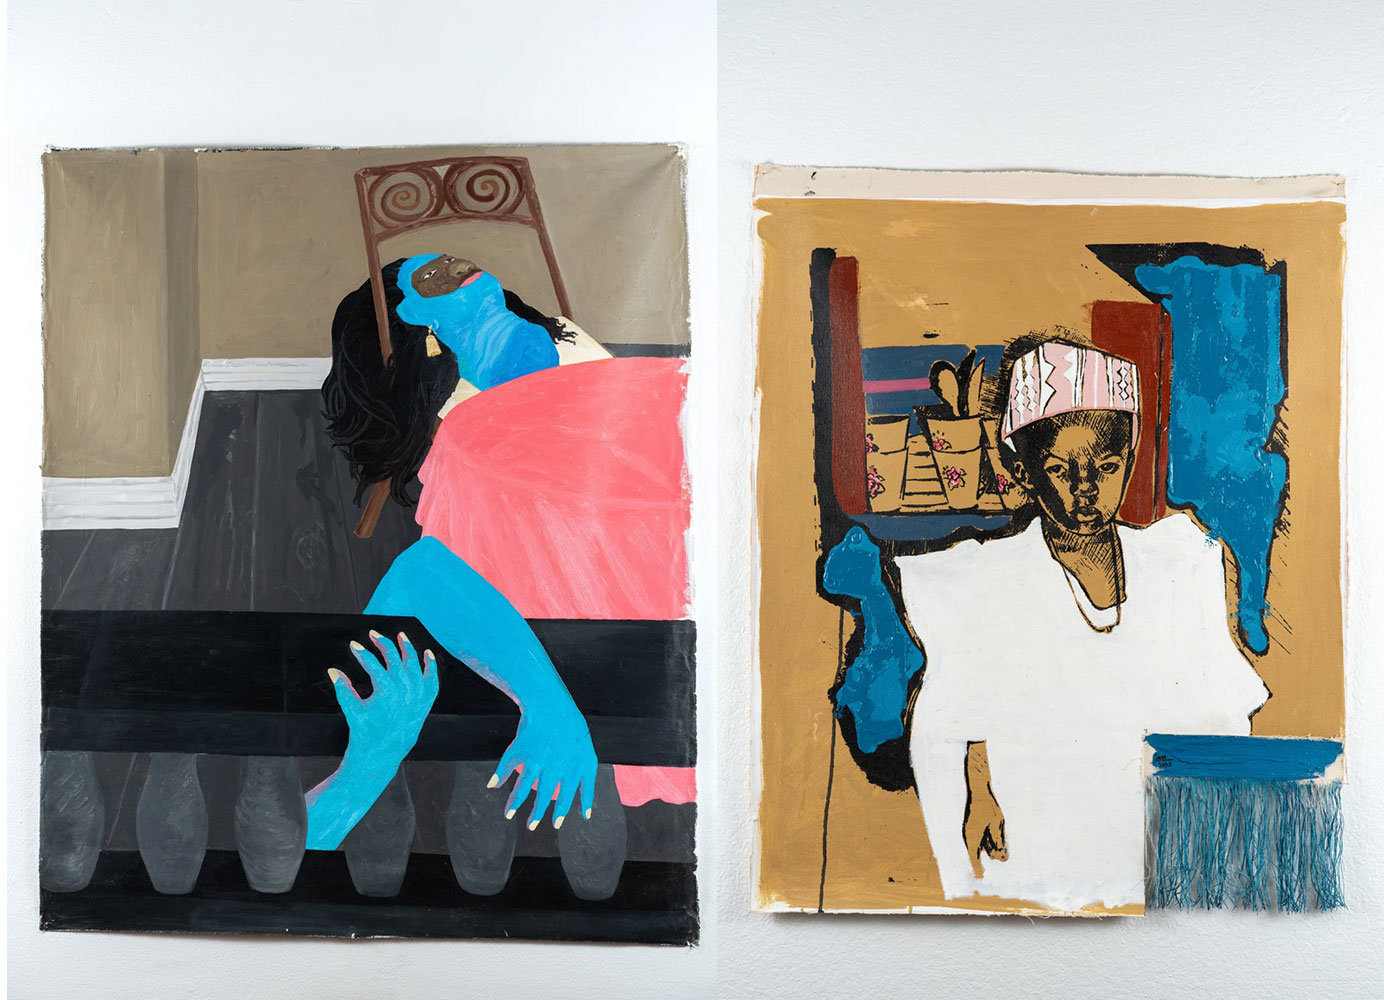 Left: Daniel Tetteh Nartey, Mood Swing, 2023, Oil and acrylic, 51 1/2 x 42 1/2 inches, © Daniel Tetteh Nartey , Courtesy the artist and McLennon Pen Co. GalleryRight: Salihu Mohammed, The In-between, 2023, Mixed media, 37 1/2 x 27 1/2 inches, © Salihu Mohammed, Courtesy the artist and McLennon Pen Co. Gallery 